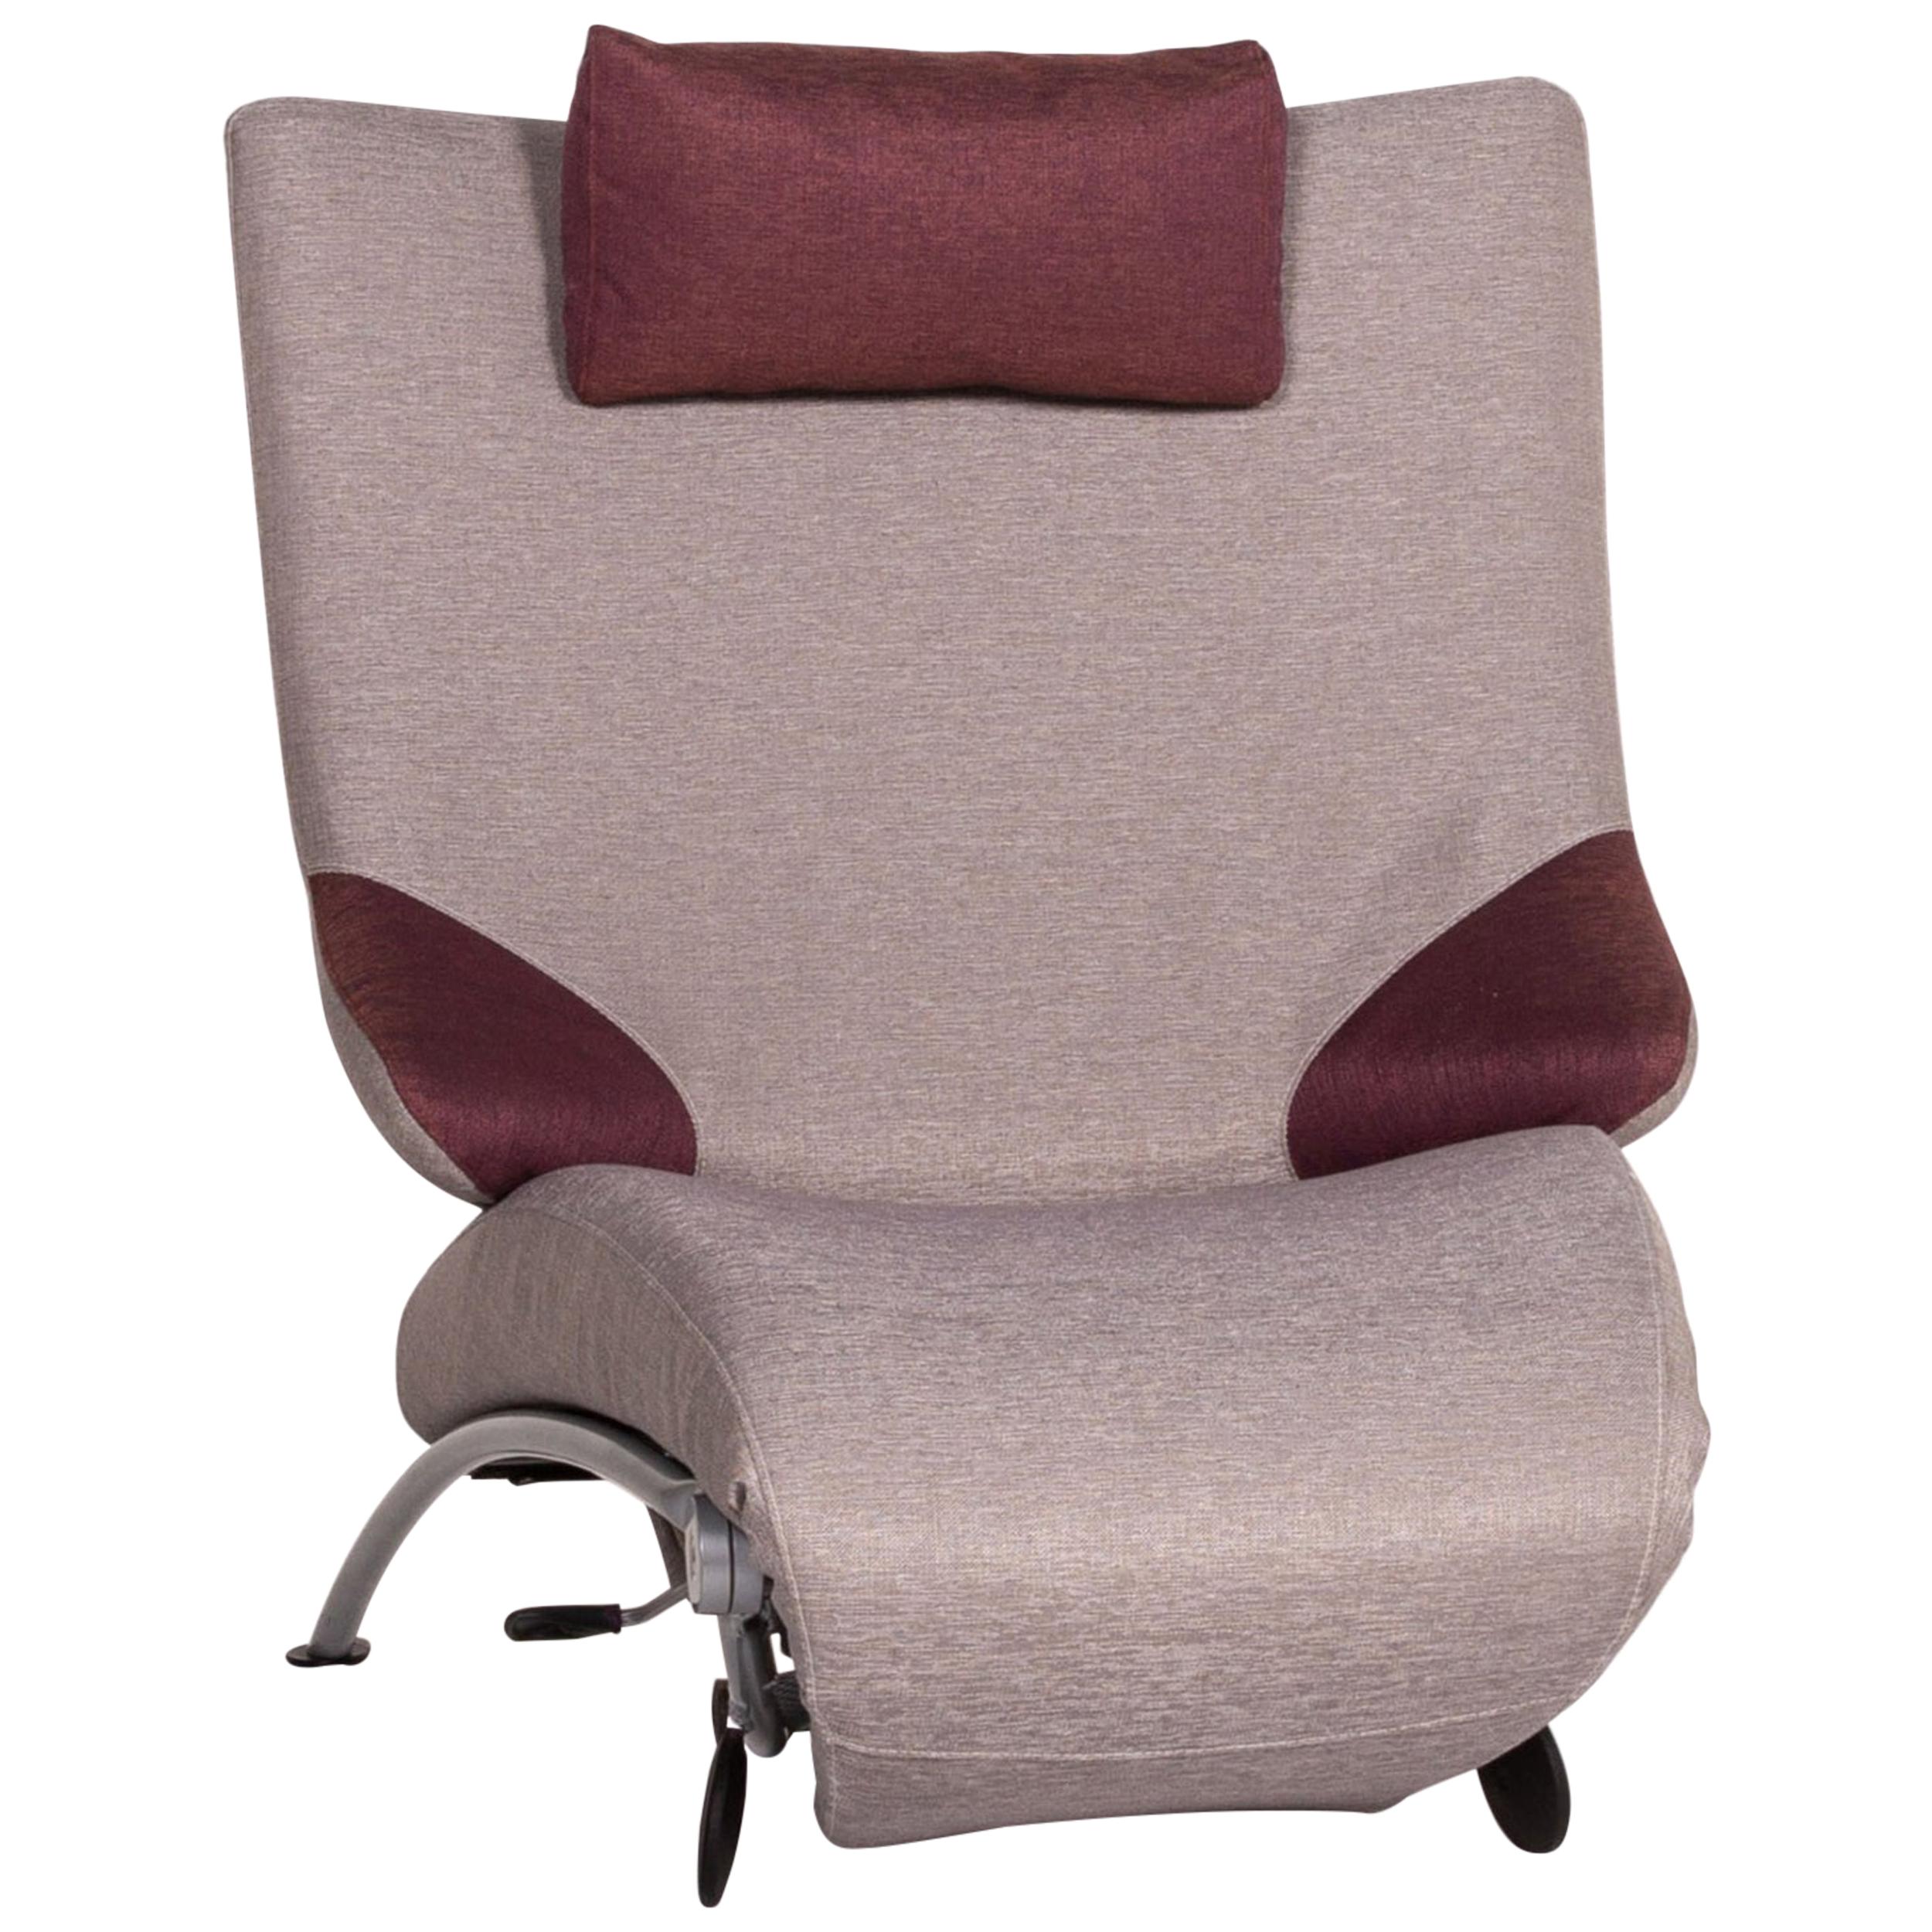 WK Wohnen Solo 699 Fabric Lounger Gray Purple Relax Lounger Armchair Relax